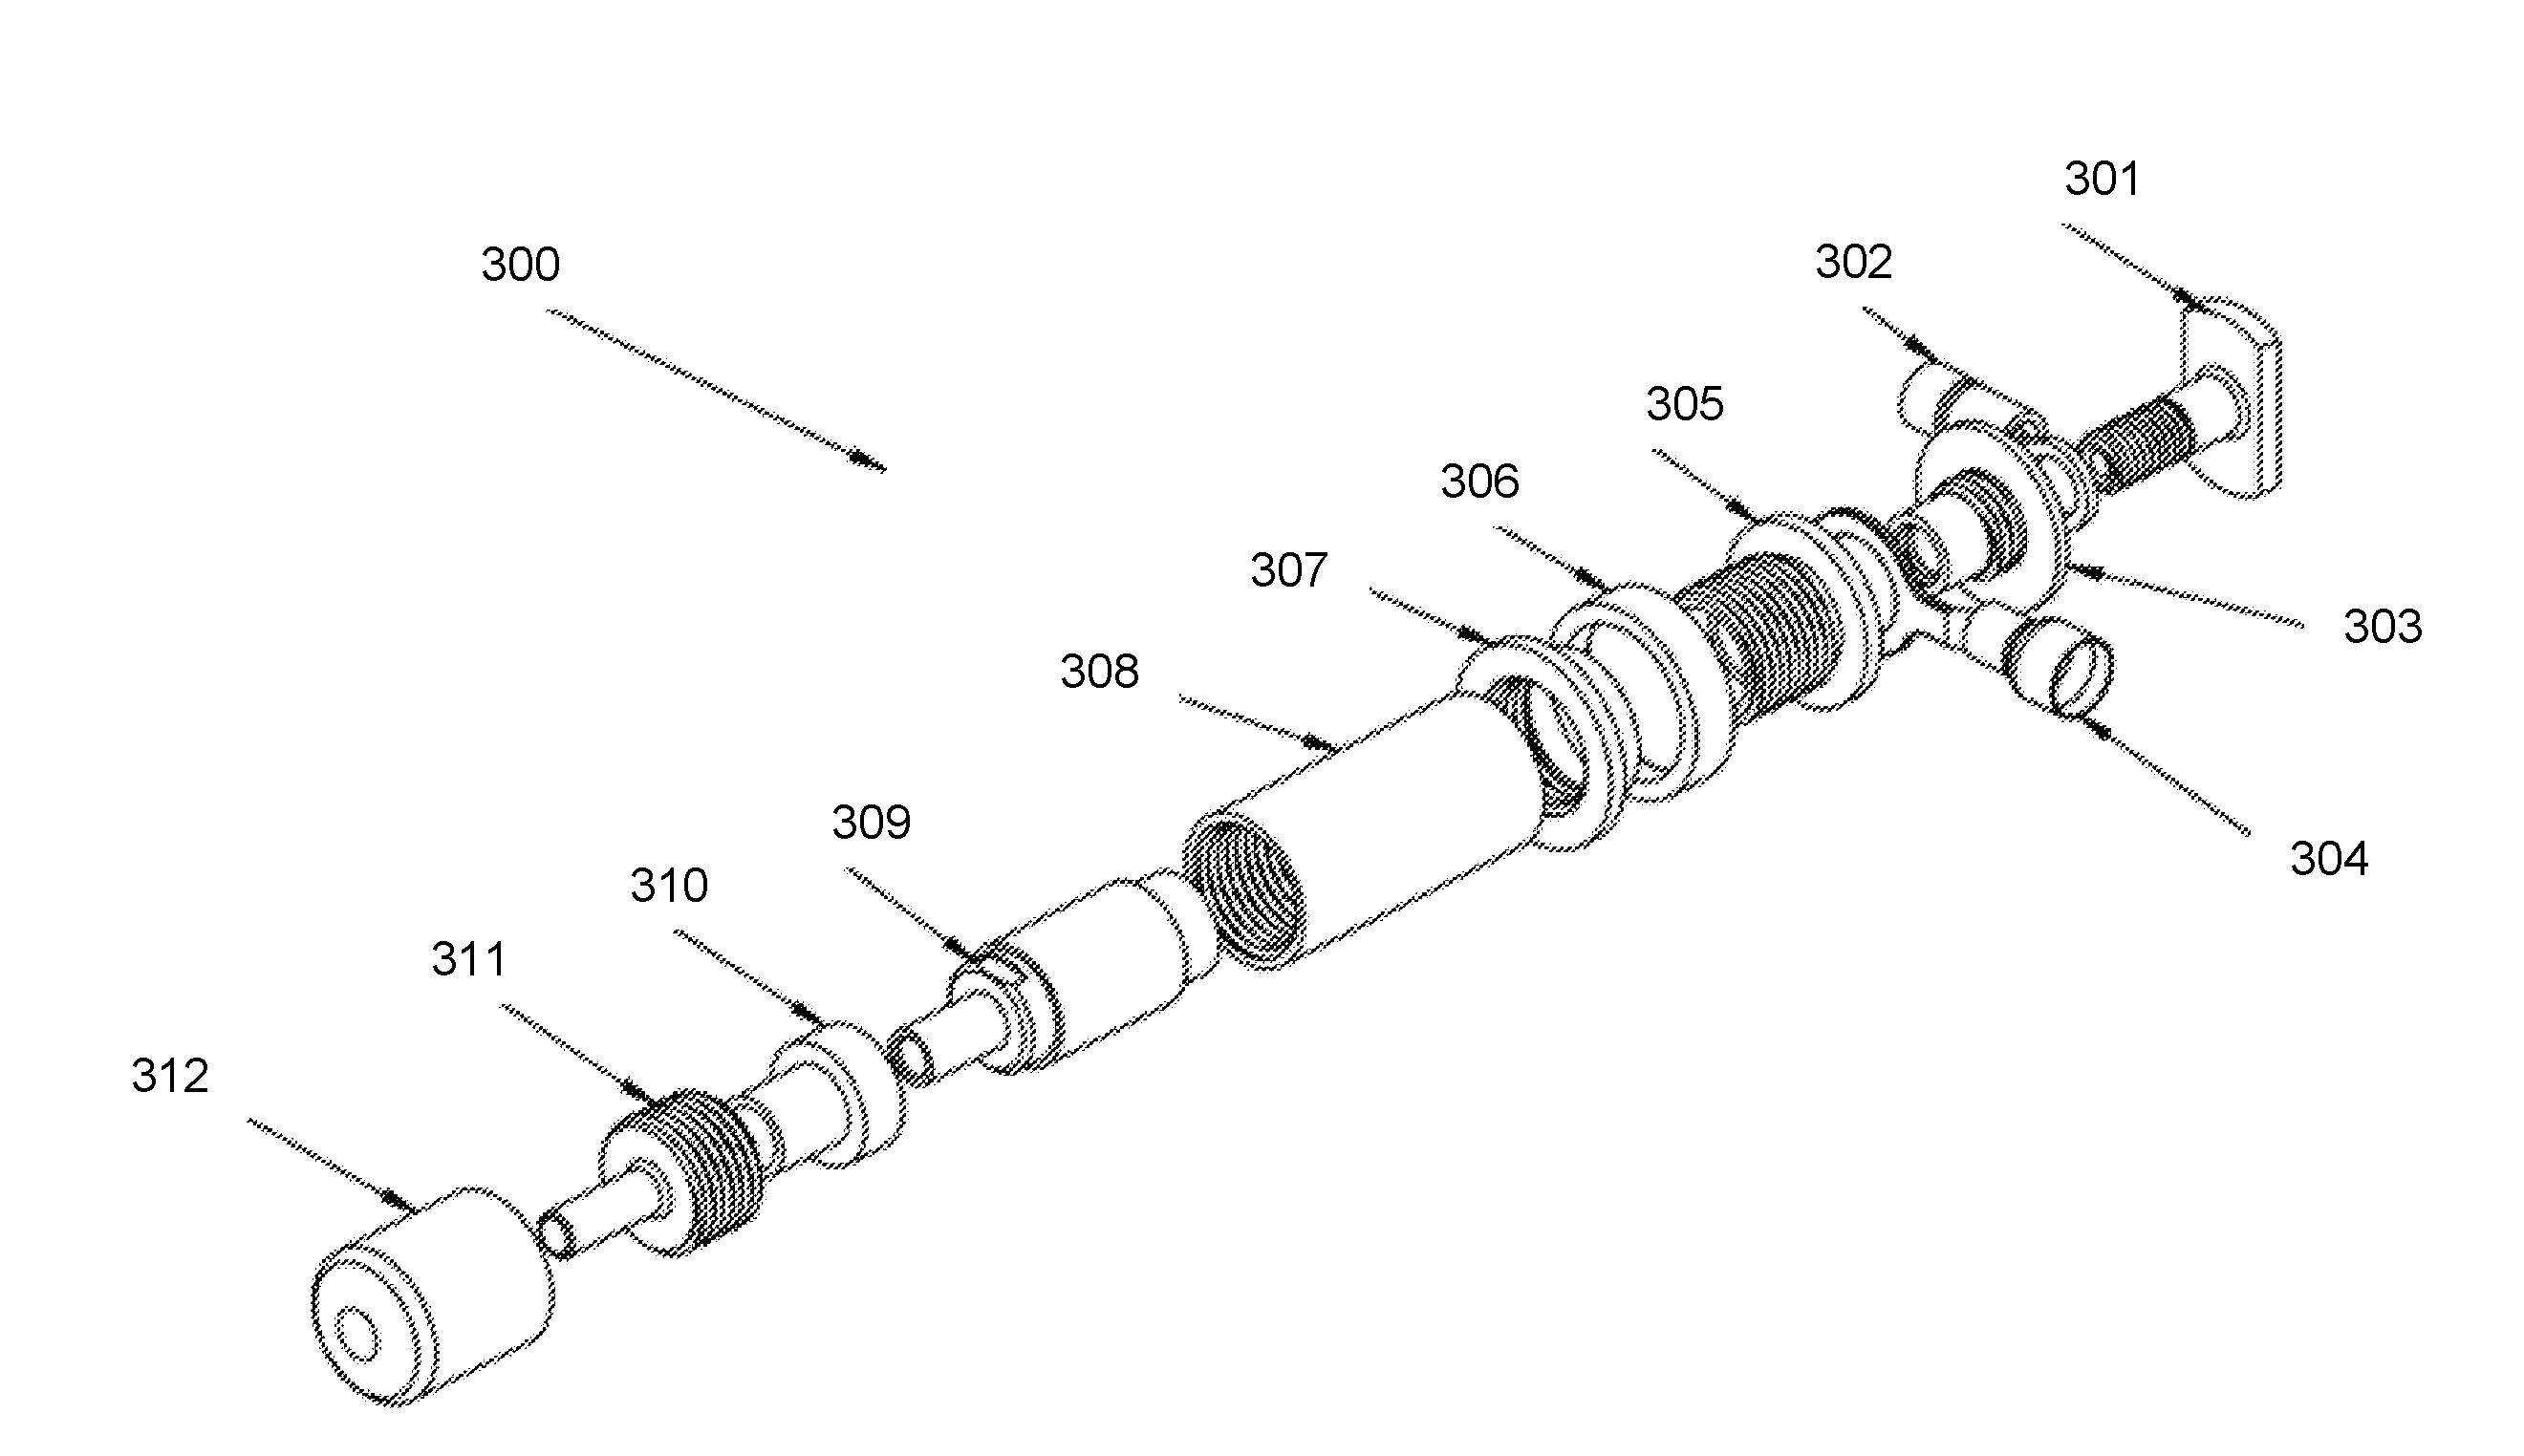 Dual-conductor suspension system for an electrical apparatus